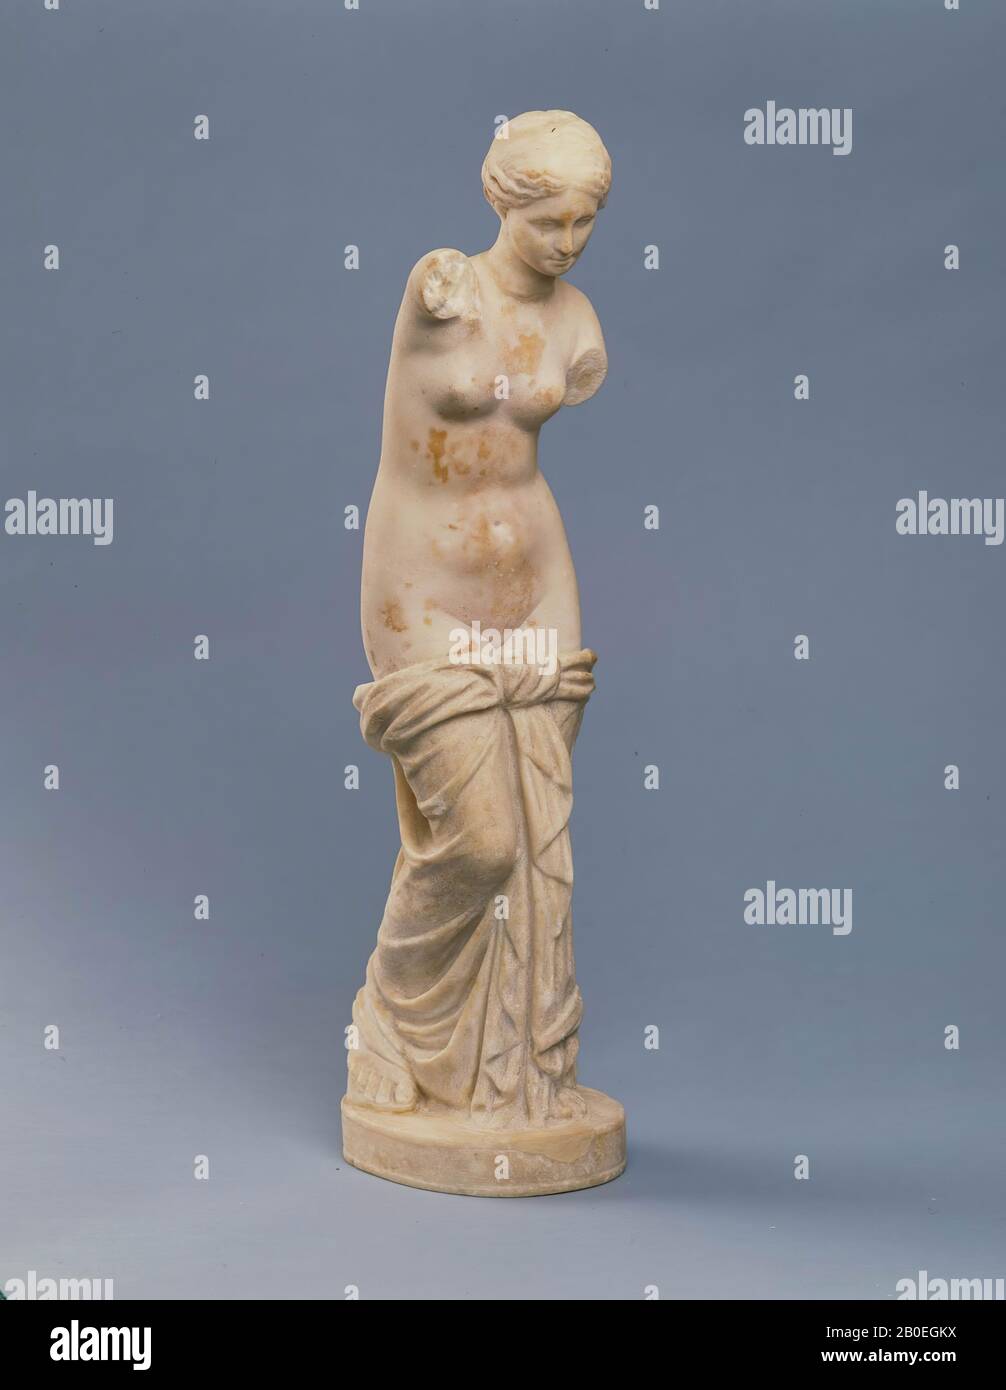 Statue of Venus, type Anadyomene. A cloth is knotted over the thighs, which falls on the feet. Poor missing. The statue is composed of different parts opus mixtum., Sculpture, marble, 68 x 15 x 10 cm, 25 kg, imperial 50-350 AD, unknown Stock Photo